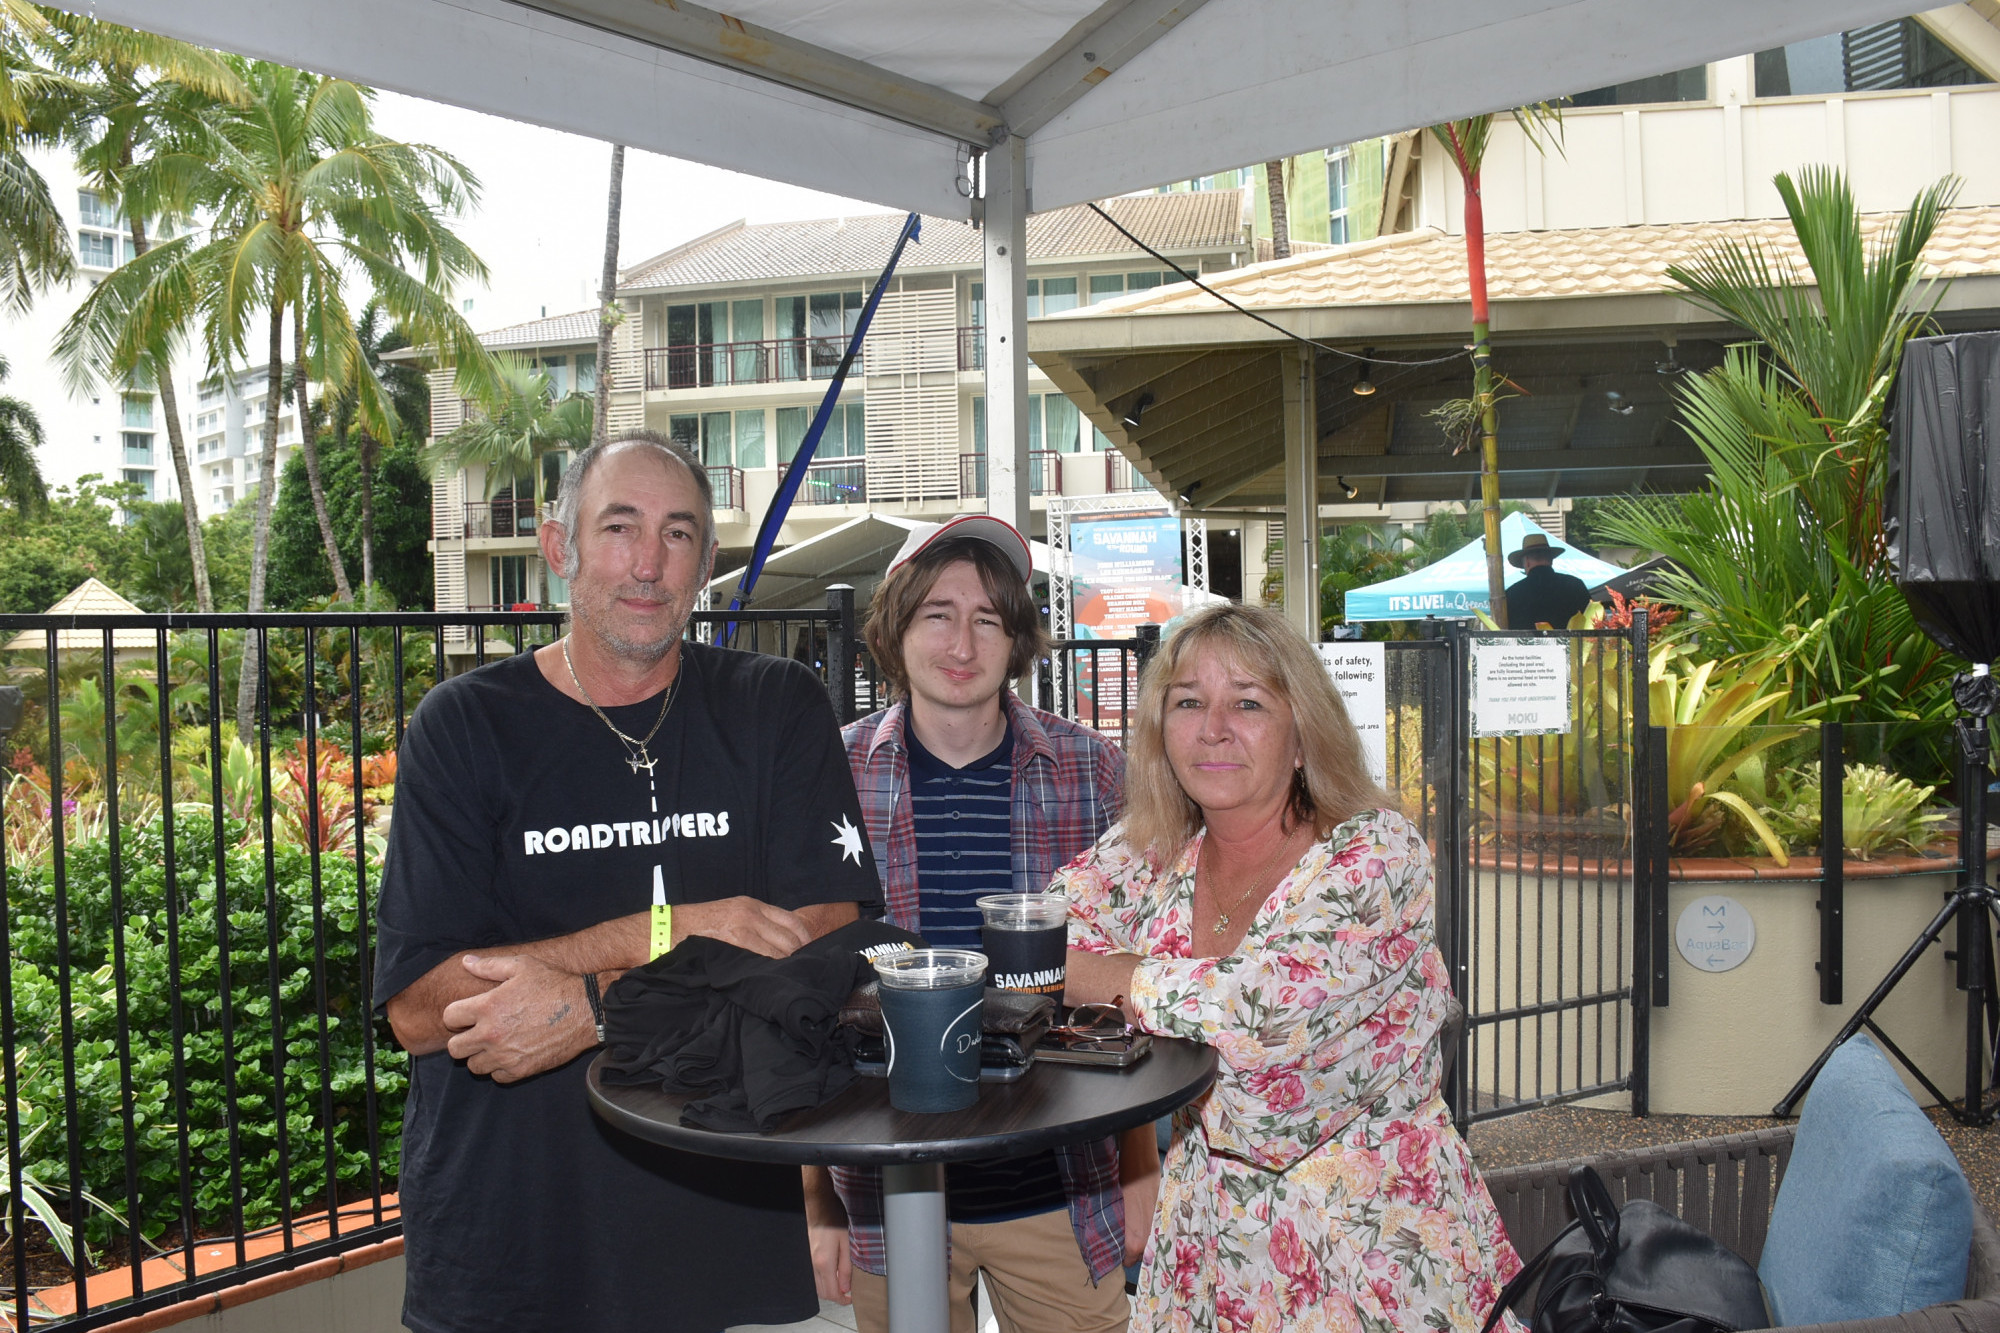 Nipper Brown enjoyed the Savannah Pool Party in Cairns last weekend with his family